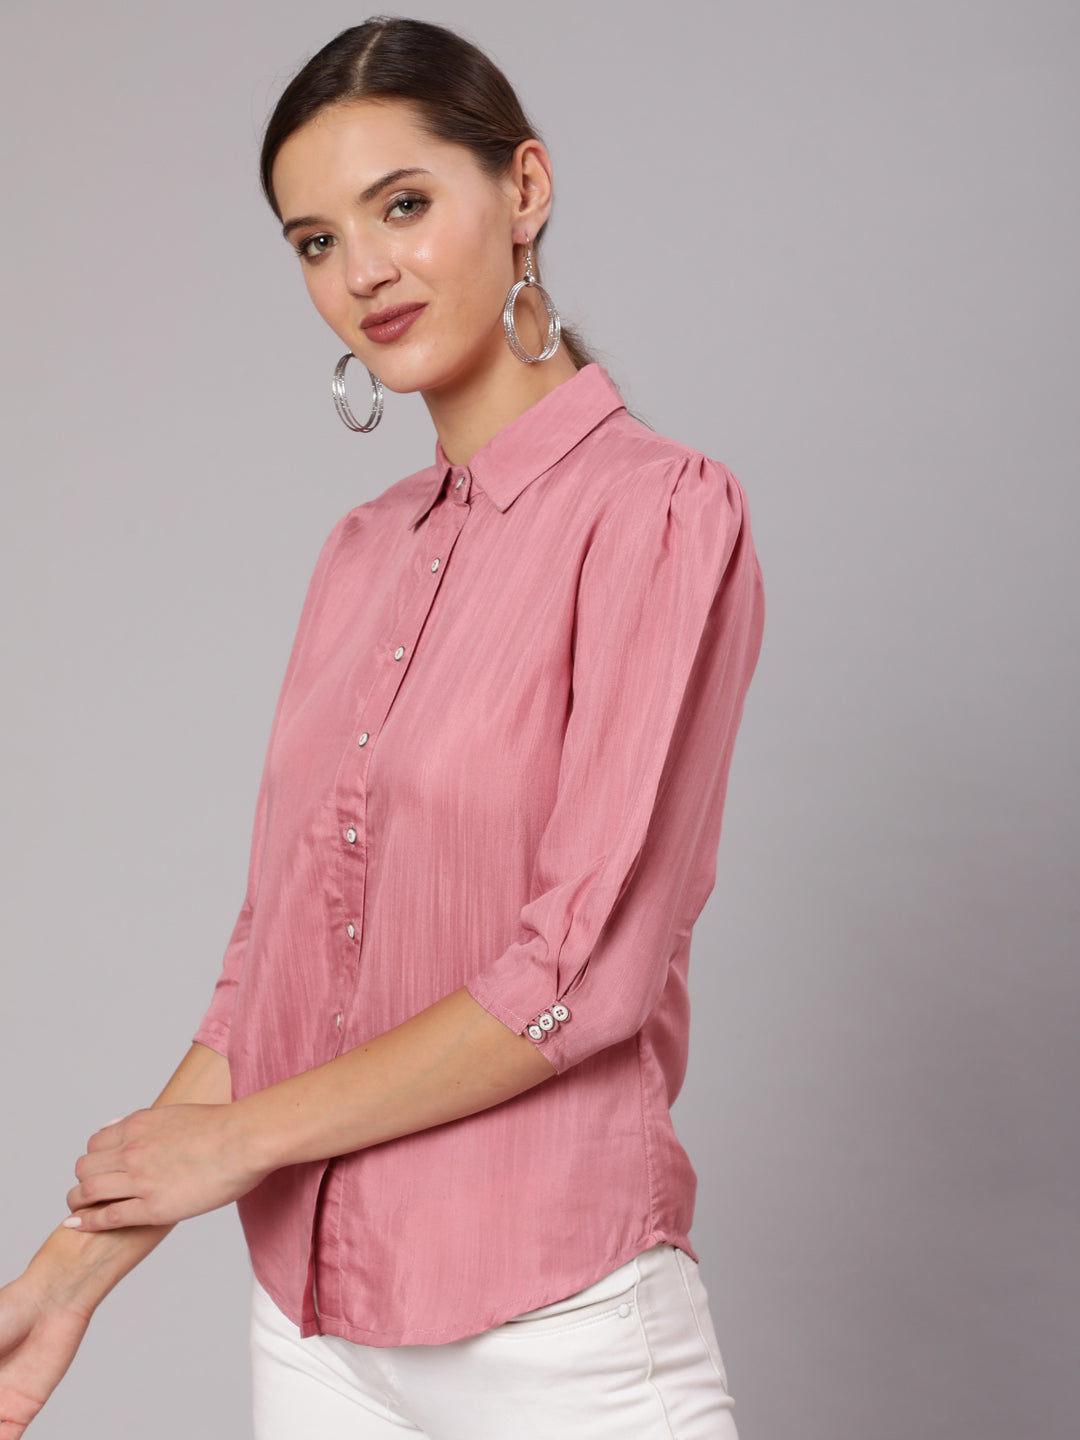 Shop Fusion wear Pink Silk Blend Three-Fourth Puffed Sleeves Shirt Online at Jaipur Kurti. Buy Party wear Suits, Dresses & Kurta sets for Women at Best Price